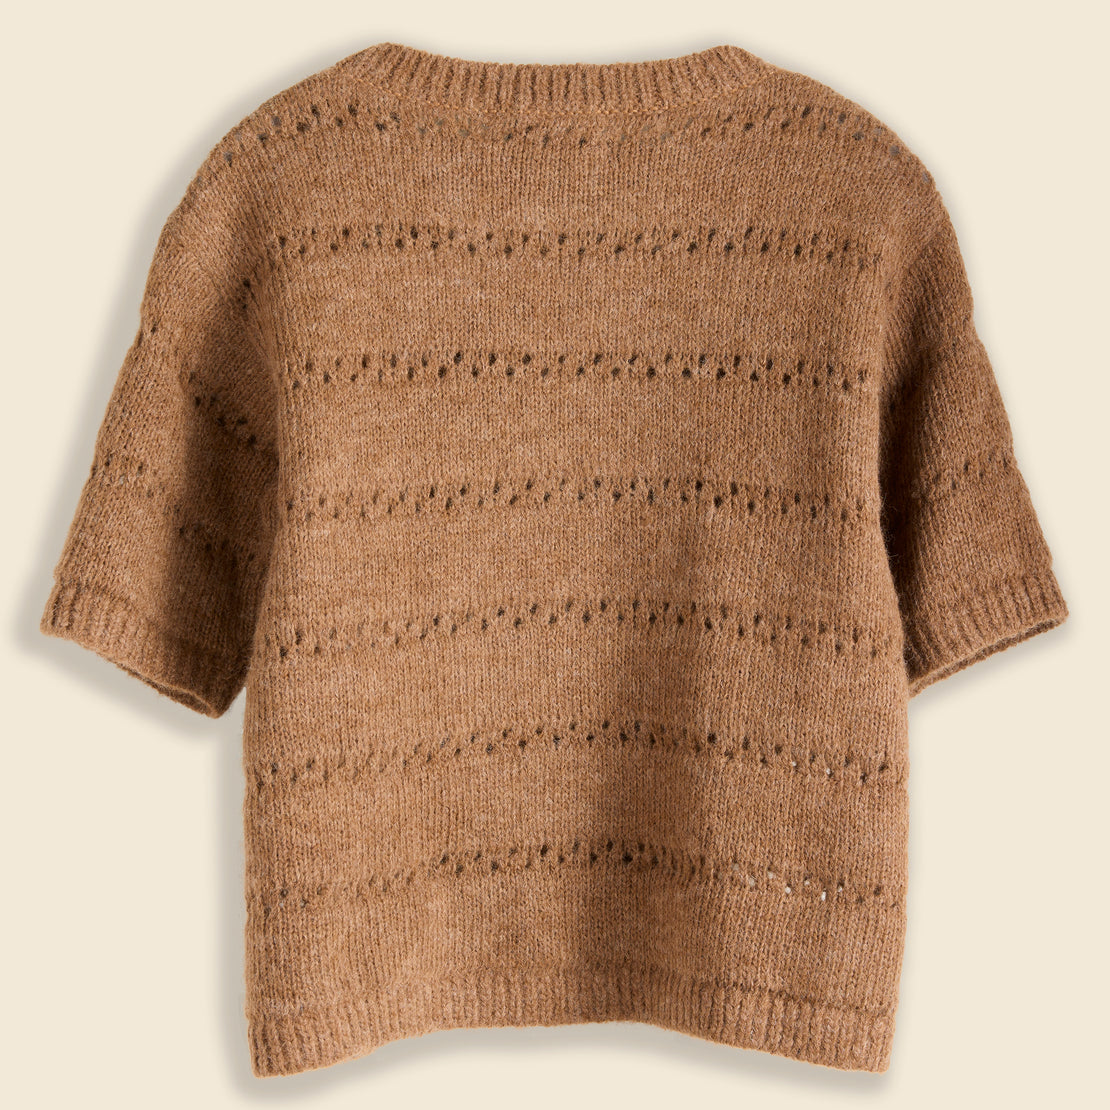 Helena Sweater - Brown - Atelier Delphine - STAG Provisions - W - Tops - Sweater